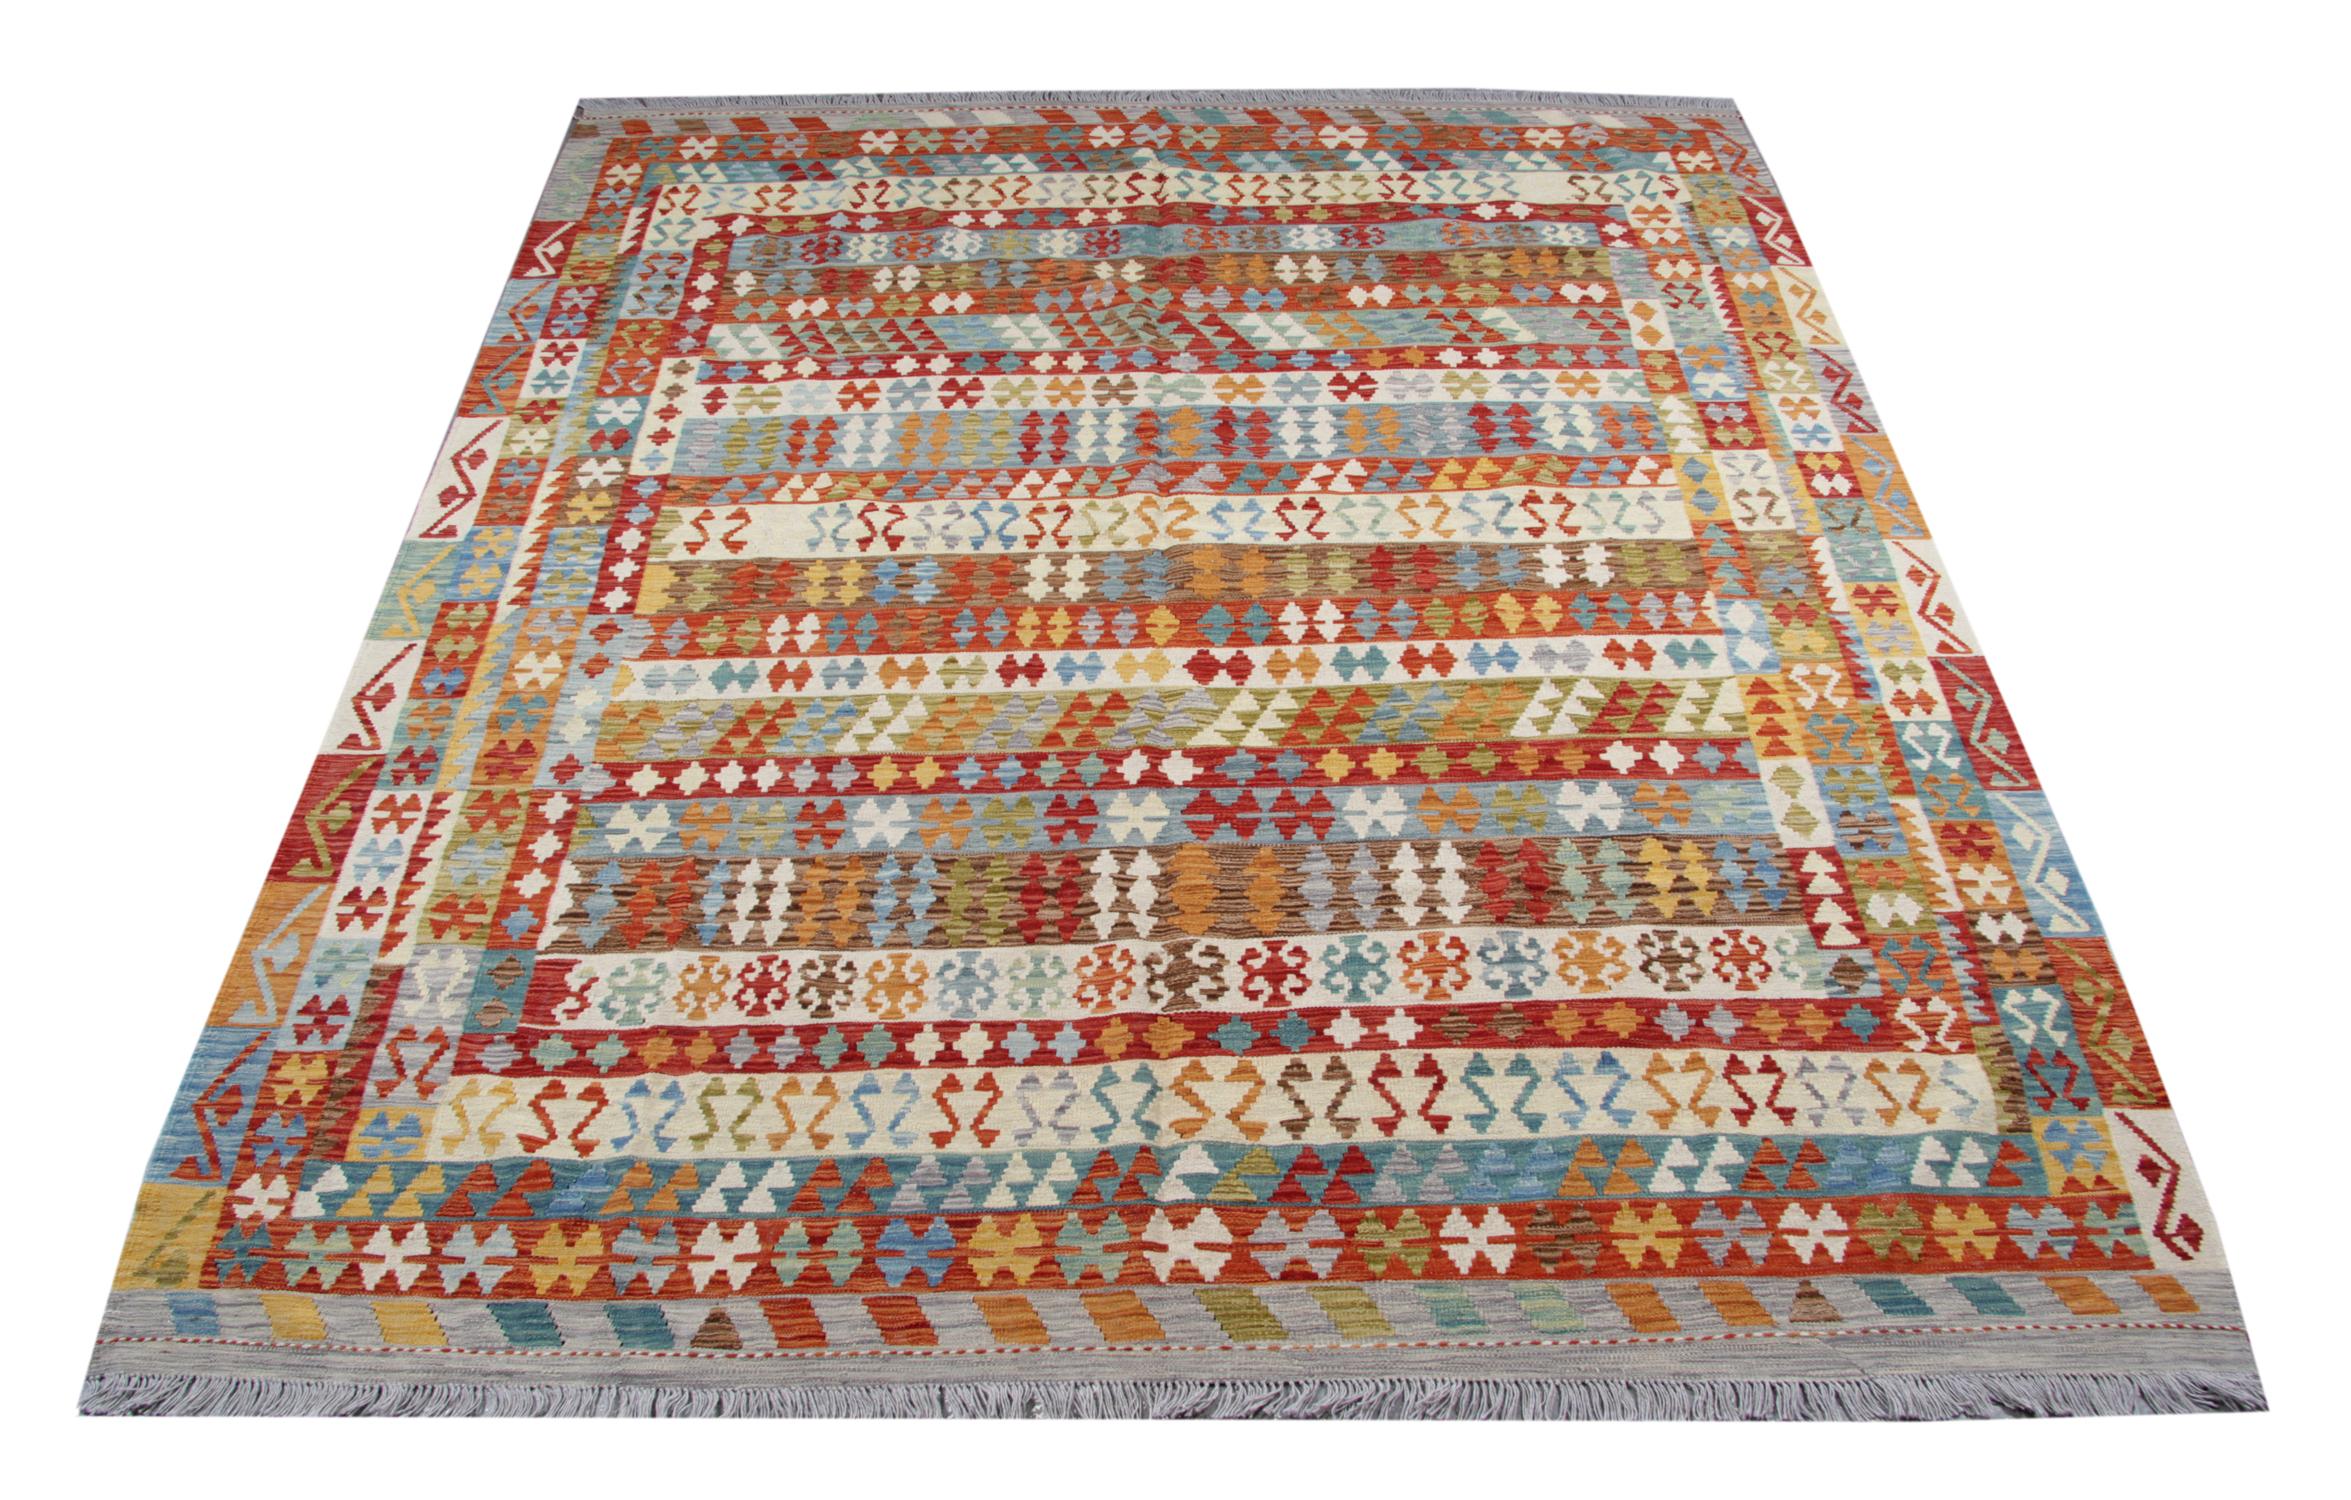 This Afghan Kilim rug is an excellent example of traditional Kilim rugs with the geometric design woven symmetrically with various vibrant and muted color pallets. These rugs were woven with traditional techniques on looms in Afghanistan.